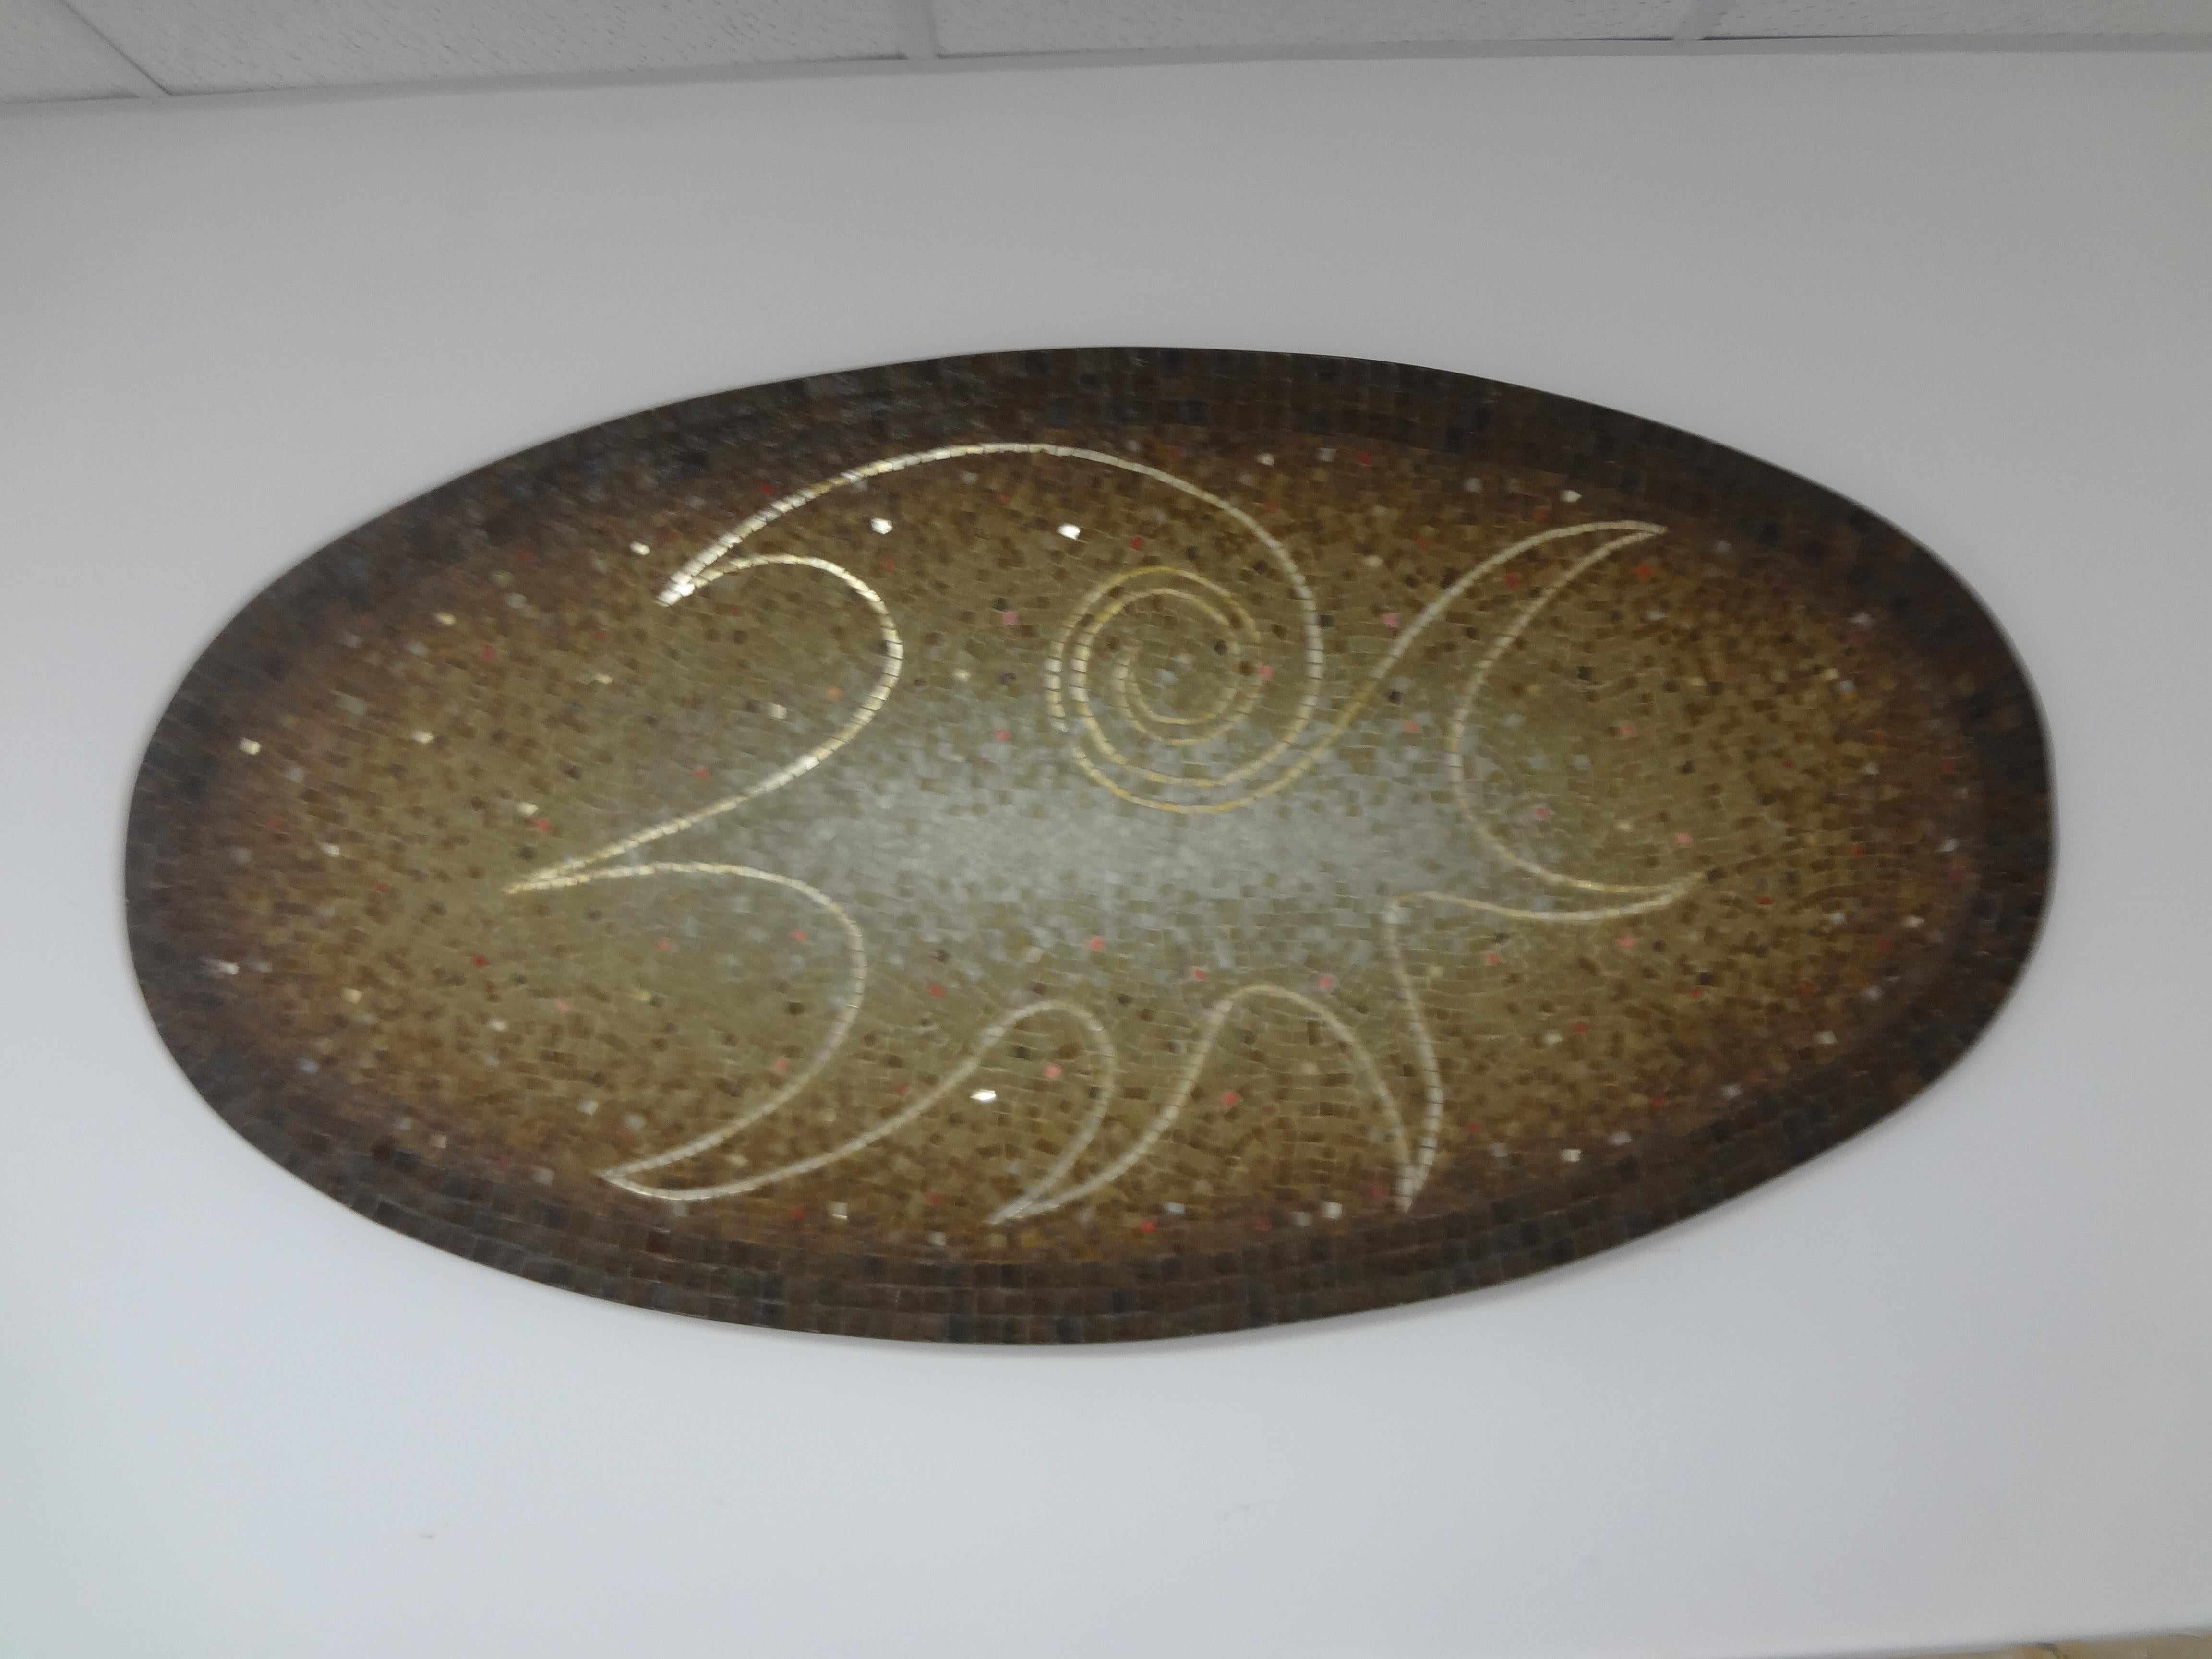 Mexican Modern Mosaic Tile Wall Sculpture Signed Genaro Alvarez. 
Our mid century modern wall sculpture is made up of an abstract ceramic tile design mounted on wood with a brass band border.
This stunning large Mexican modern oval mosaic wall